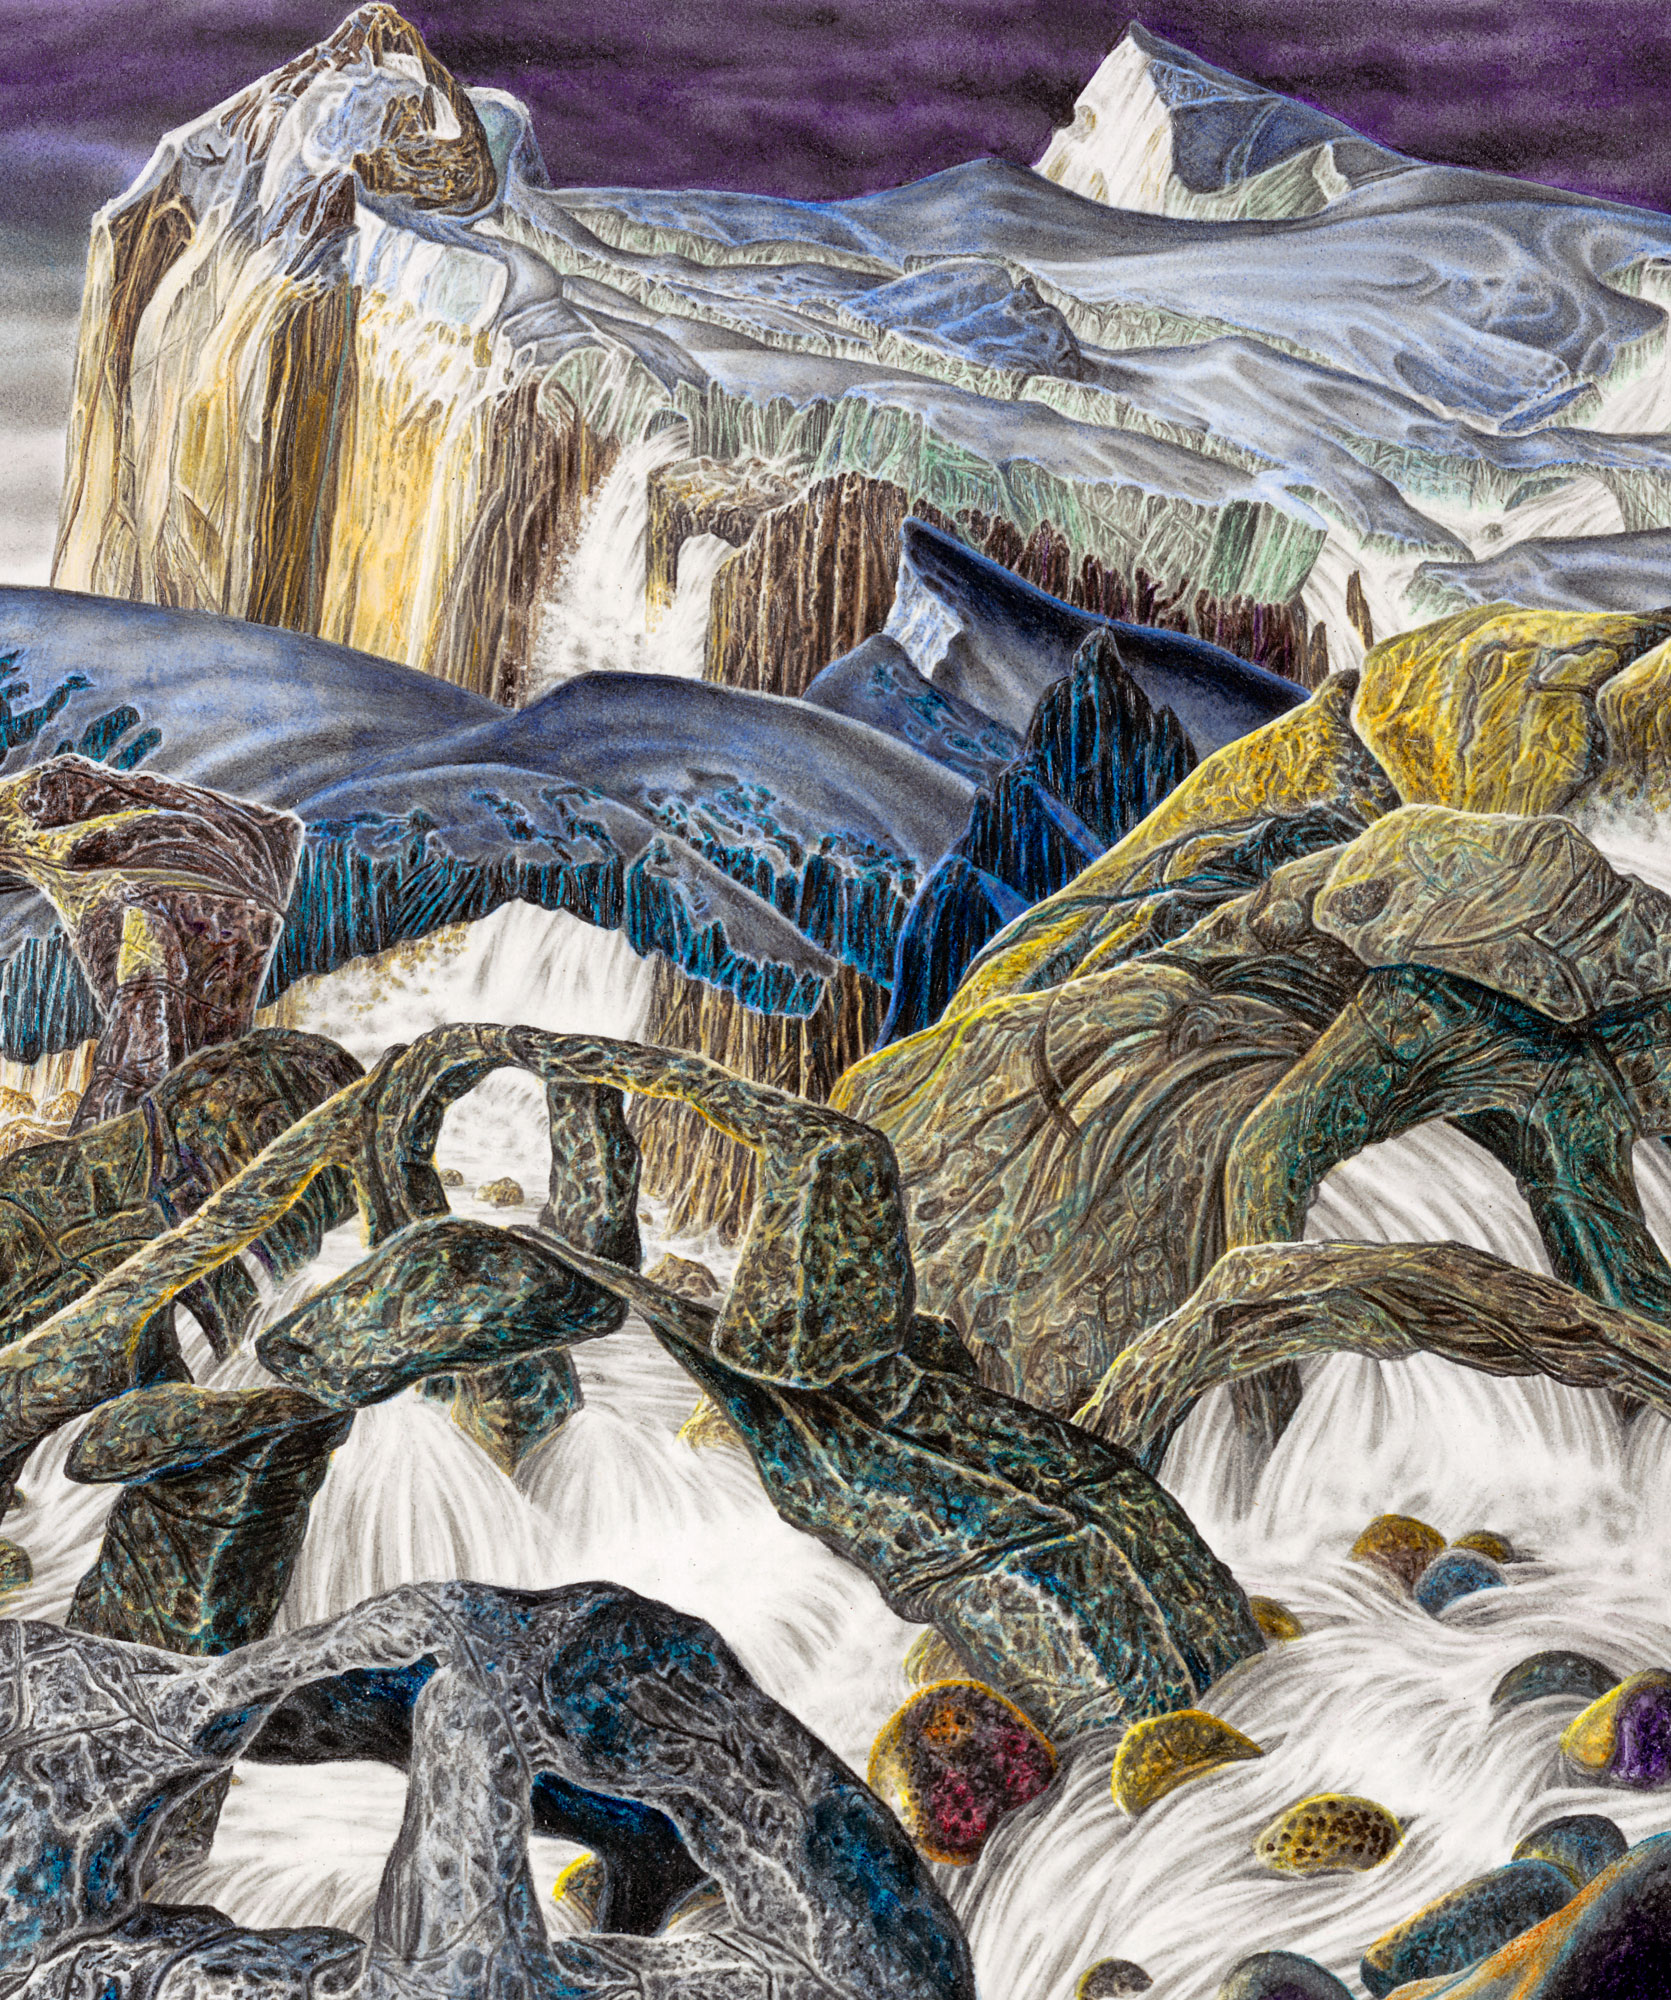 BONES OF CREATION, painting of rock arches and swirling rapids in a surrealistic setting